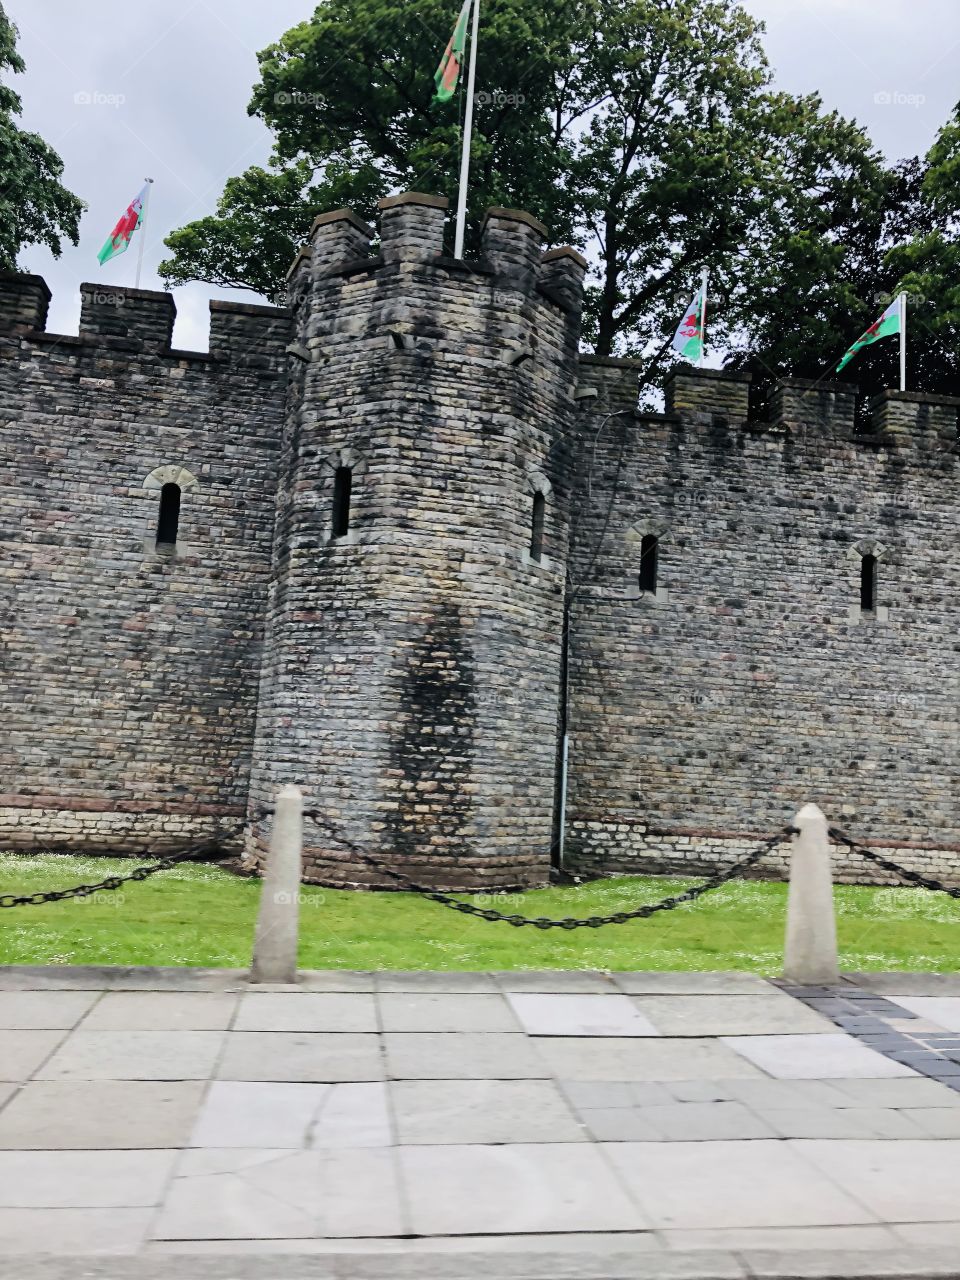 This is Cardiff castle ‘ South Wales🏴󠁧󠁢󠁷󠁬󠁳󠁿 🇬🇧